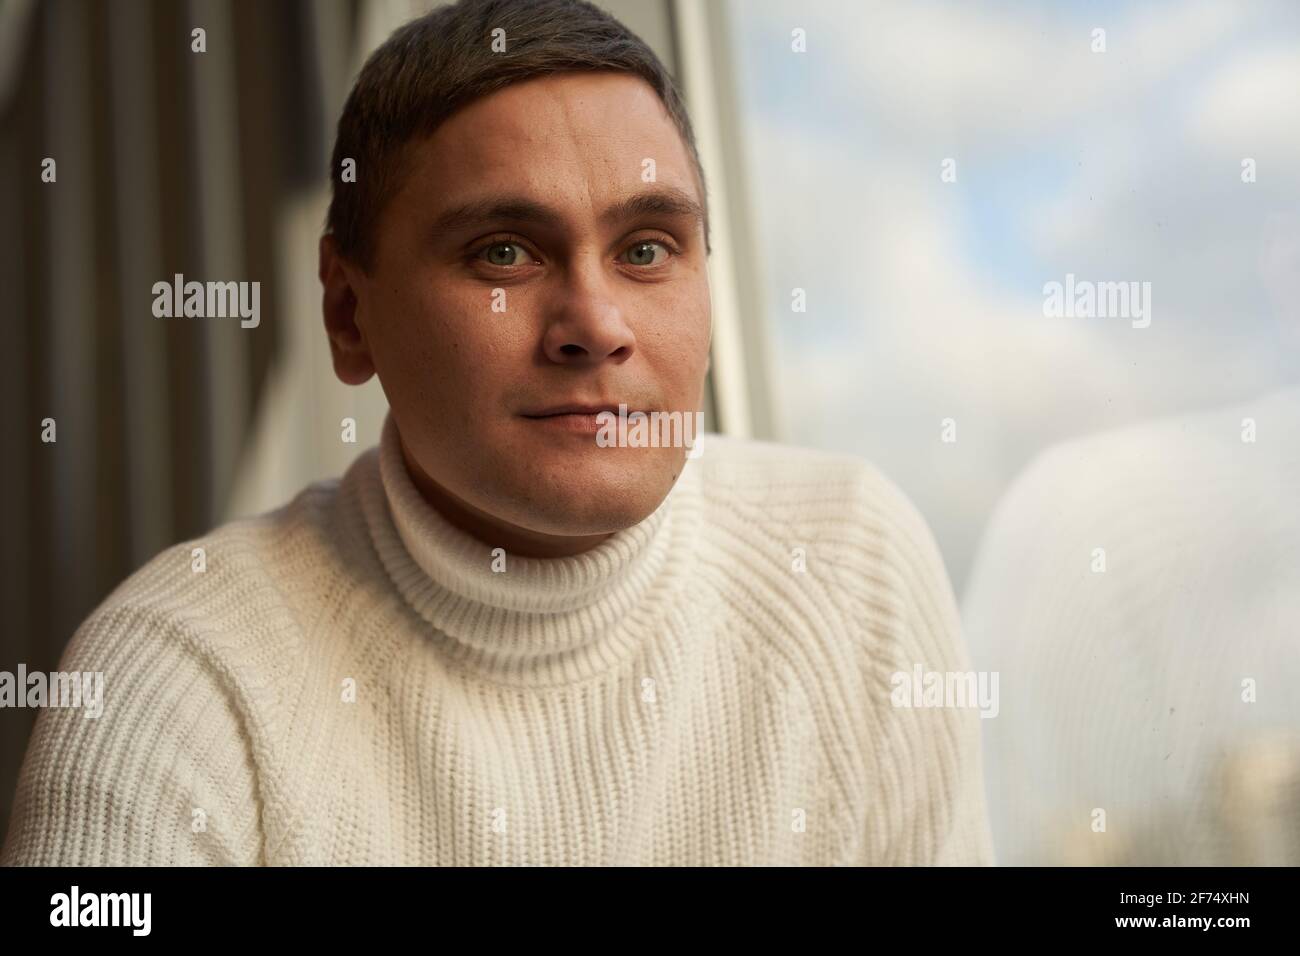 The handsome man in the room smiles and looks at camera. A man in a white sweater. Copy space. High quality photo Stock Photo